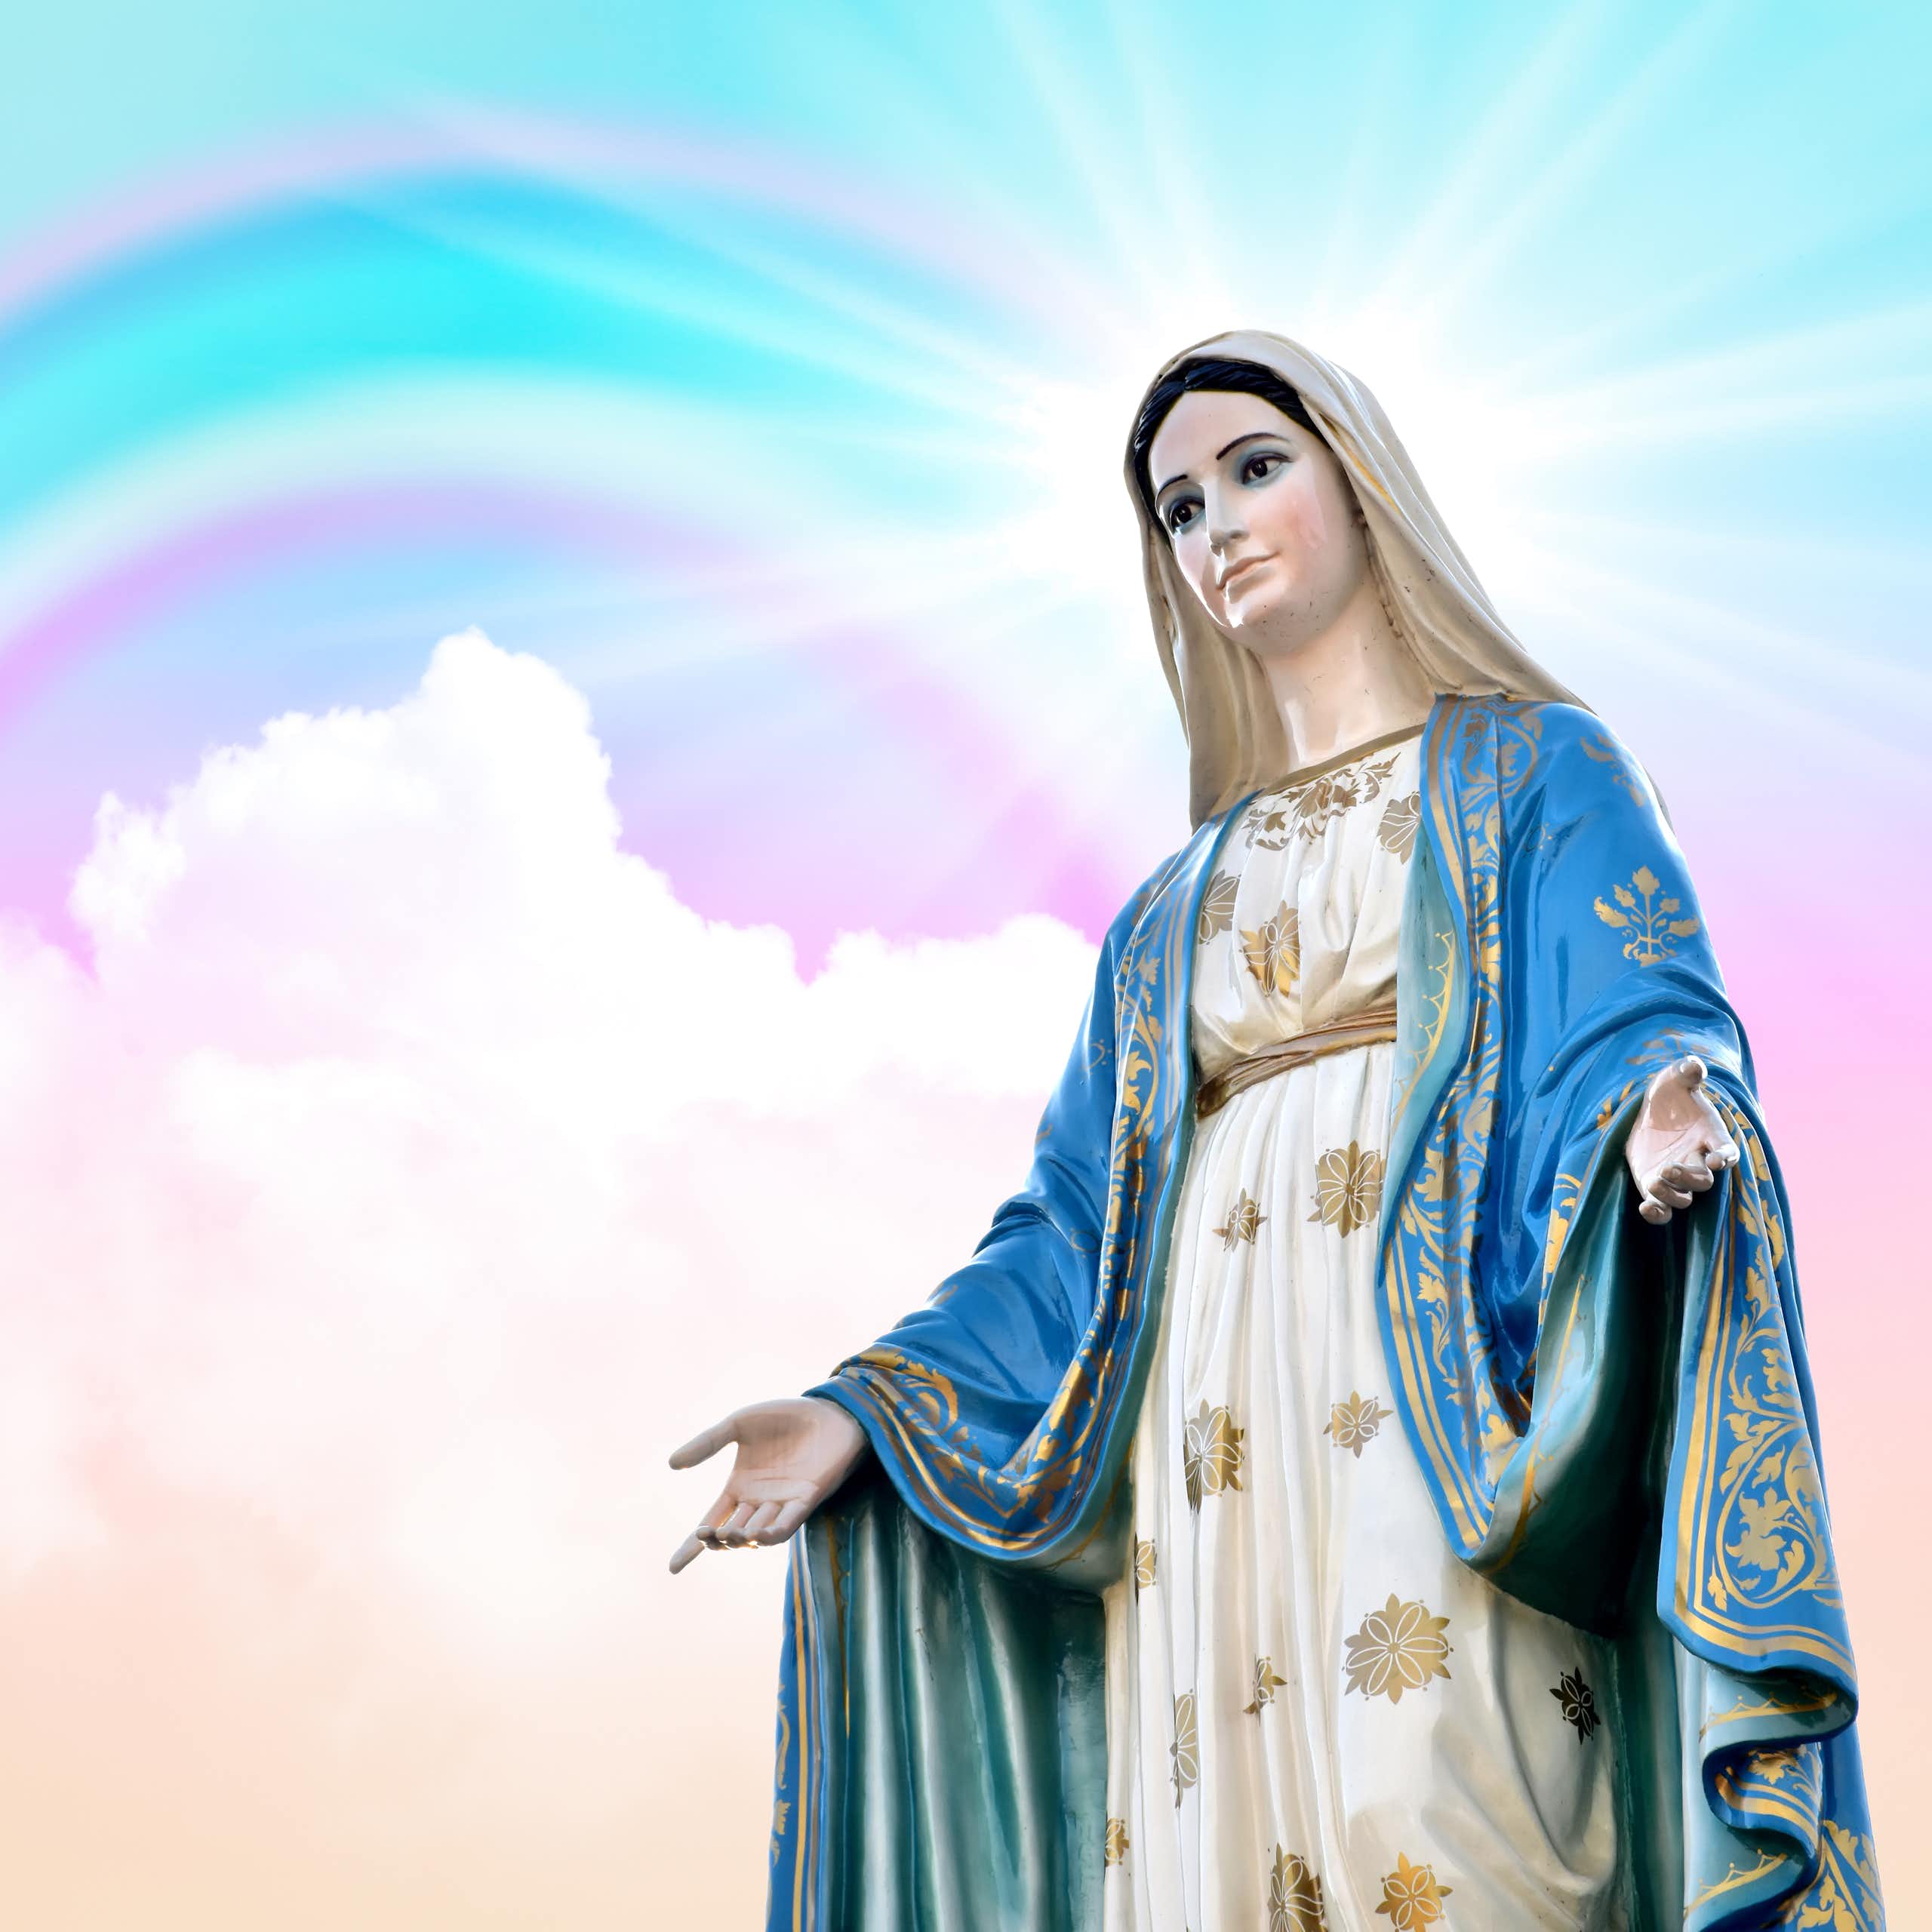 Image of Virgin Mary surrounded by pink and blue sky and rainbow.